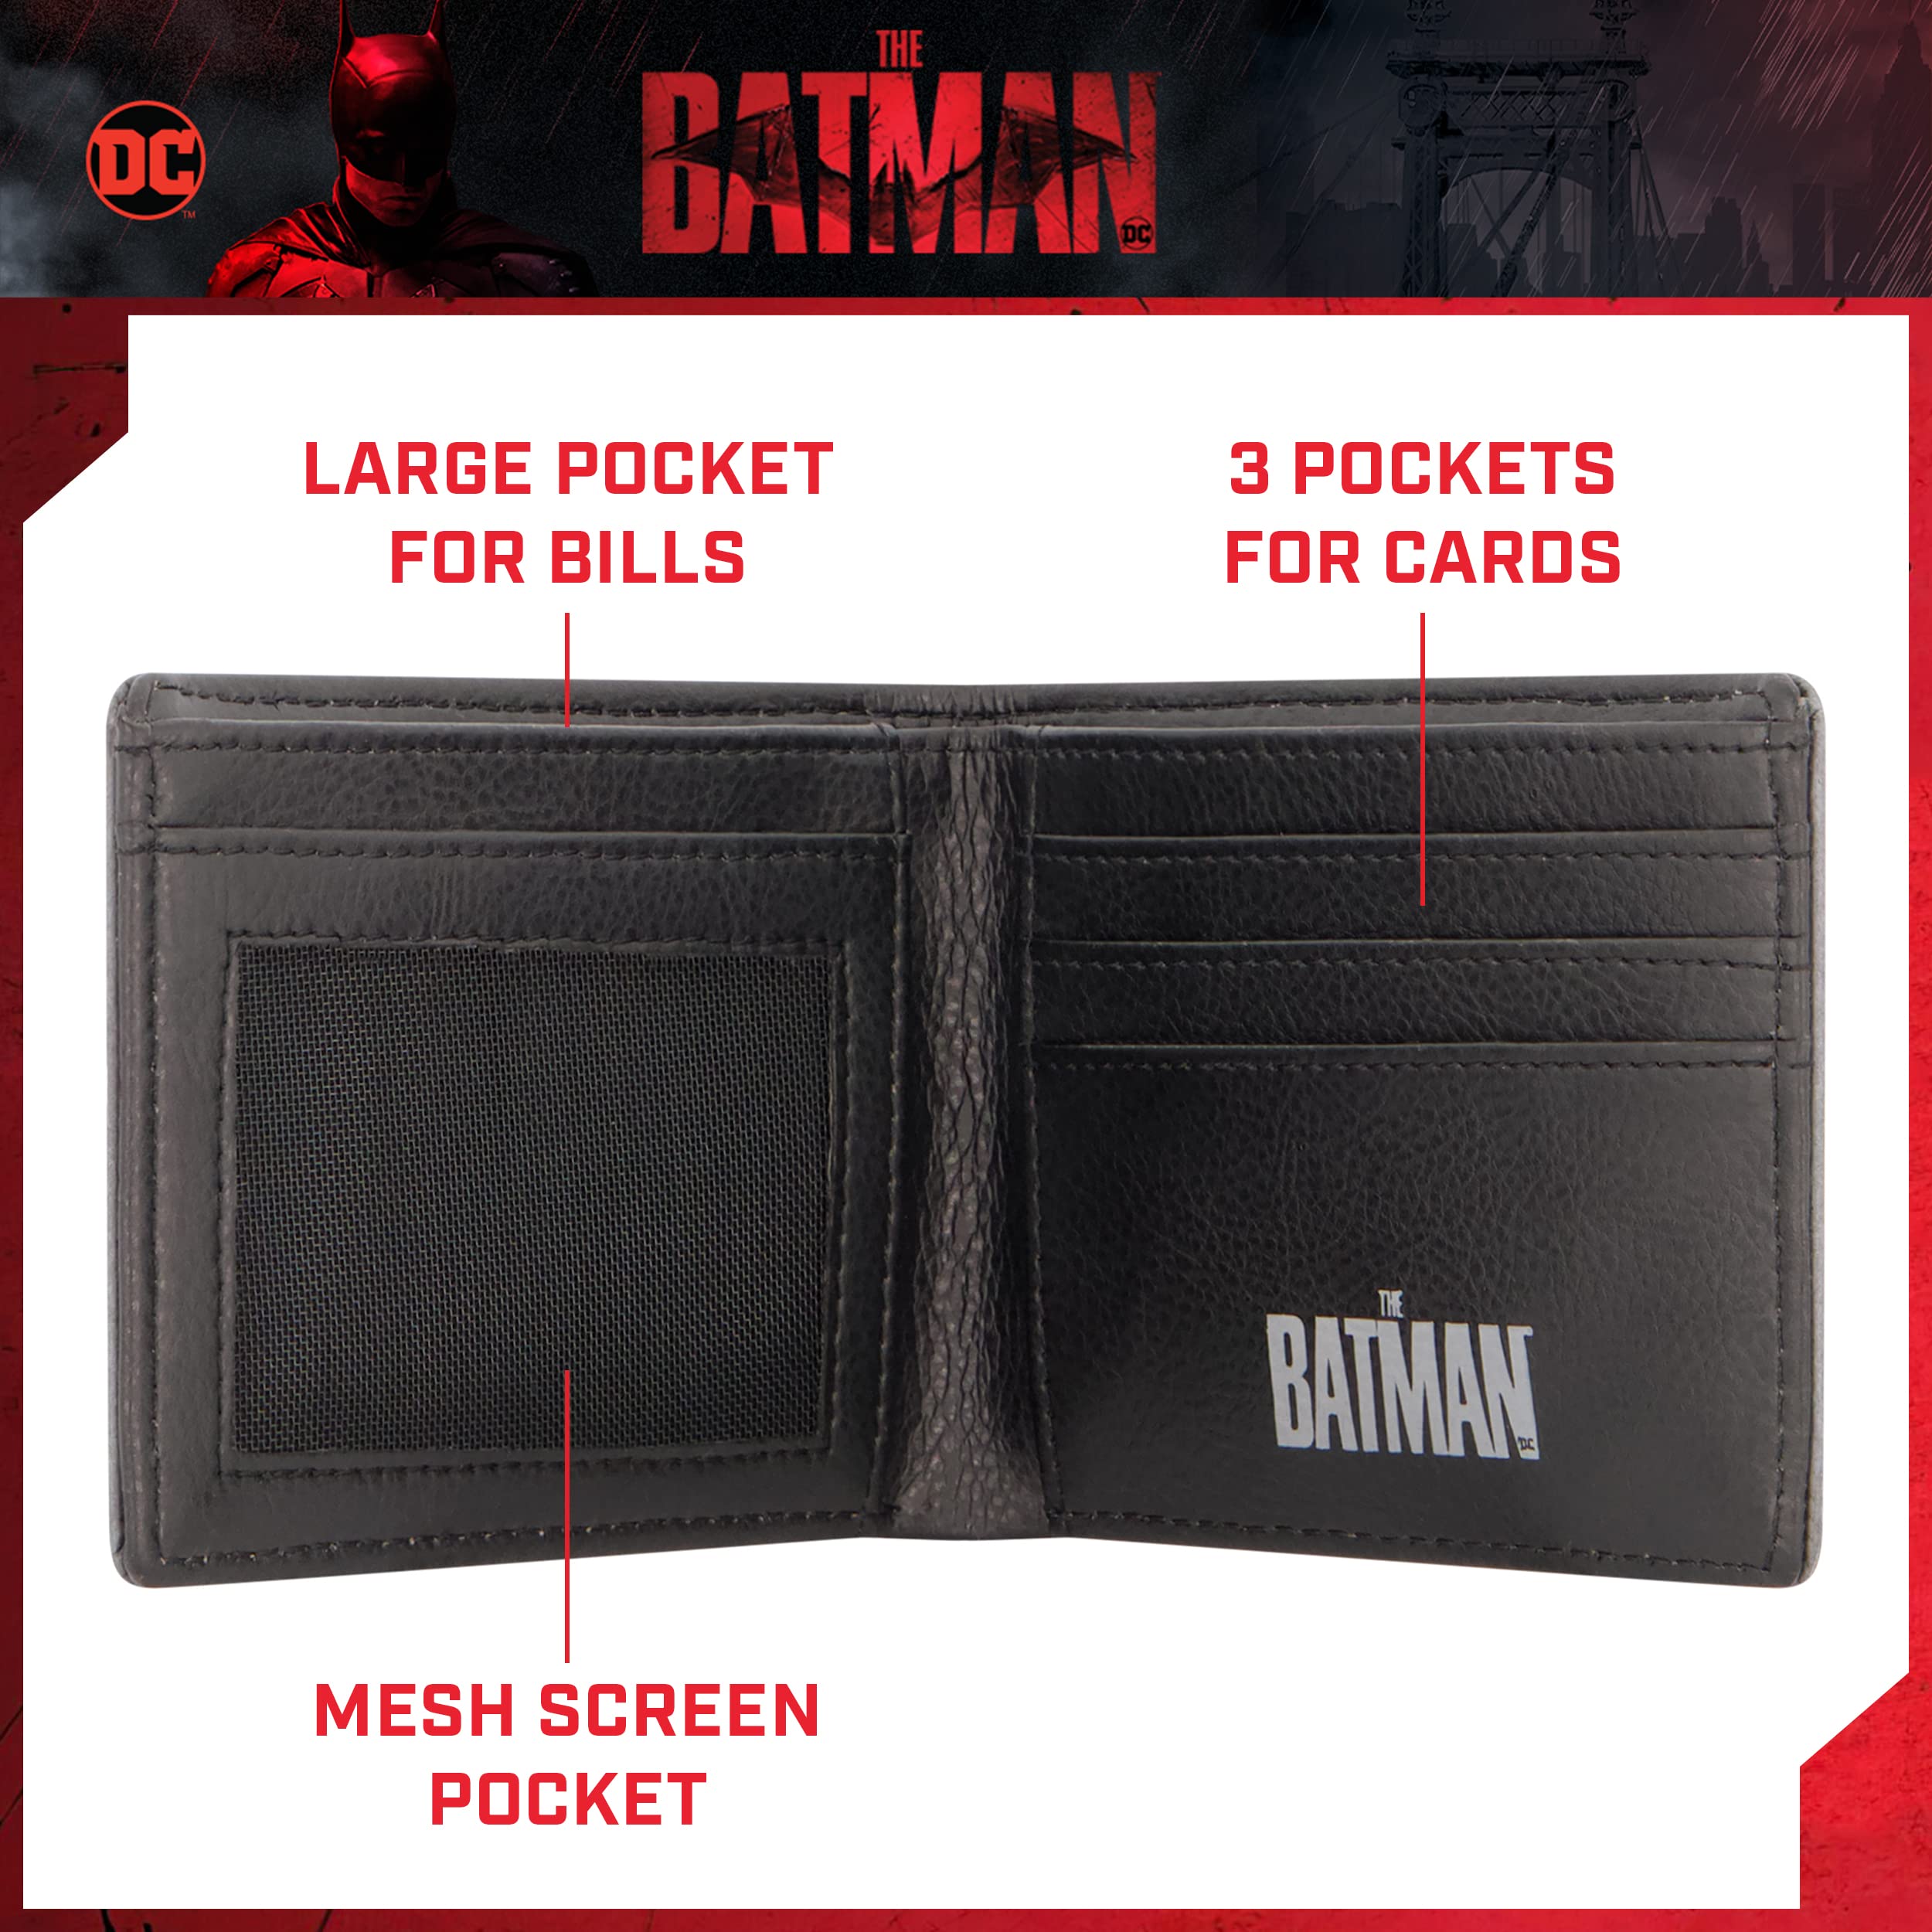 The Batman Bifold Wallet, Slim Wallet with Decorative Tin for Men and Women, Multicolor